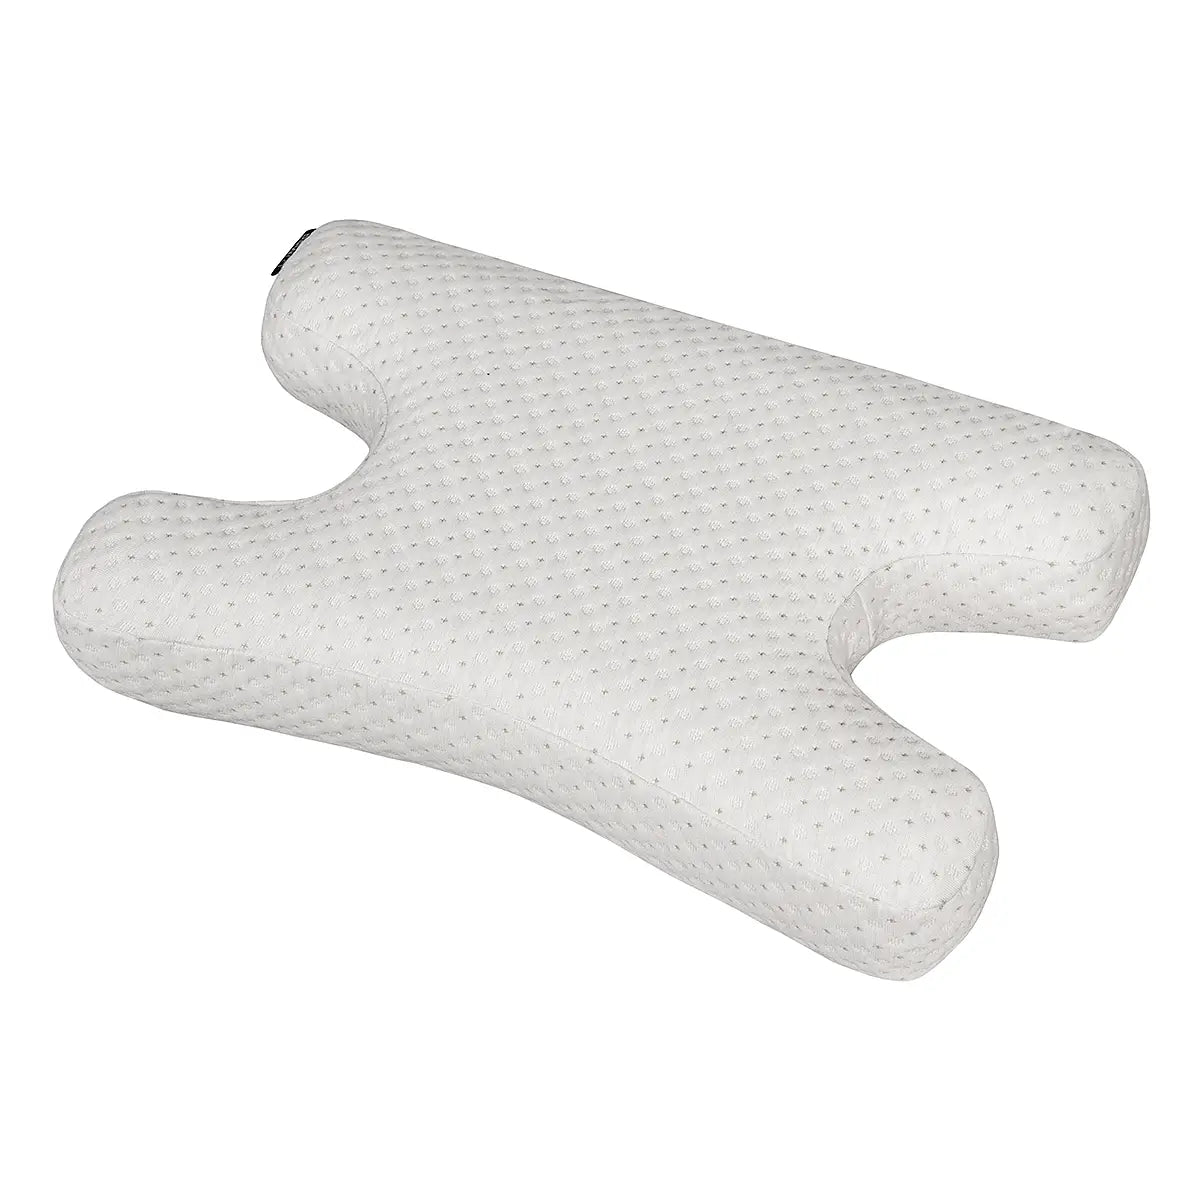 CPAP Pillow for Side Sleepers - with Side Cut-Outs